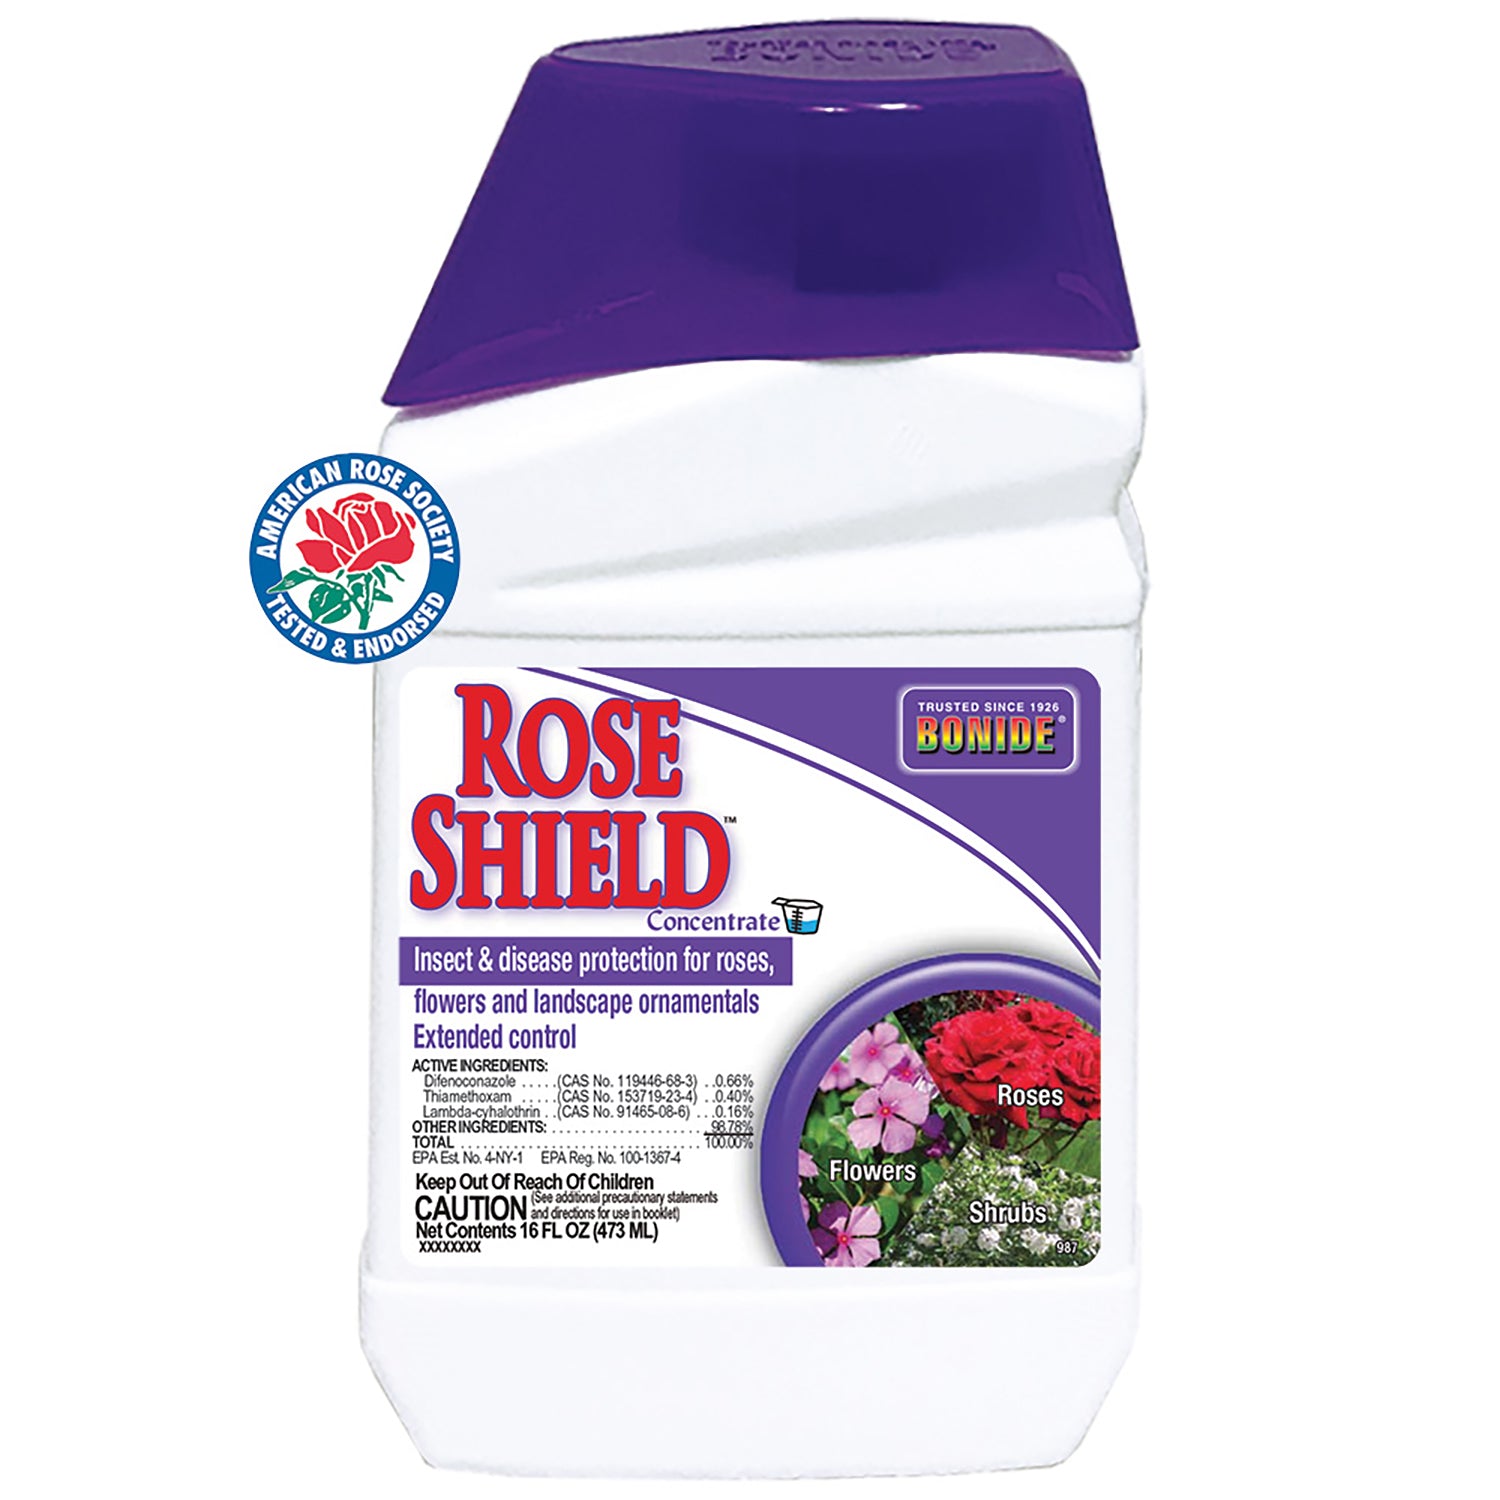 Amazing disease, insect and fungal protection for Rose Bushes, Shrubs and Ornamentals.